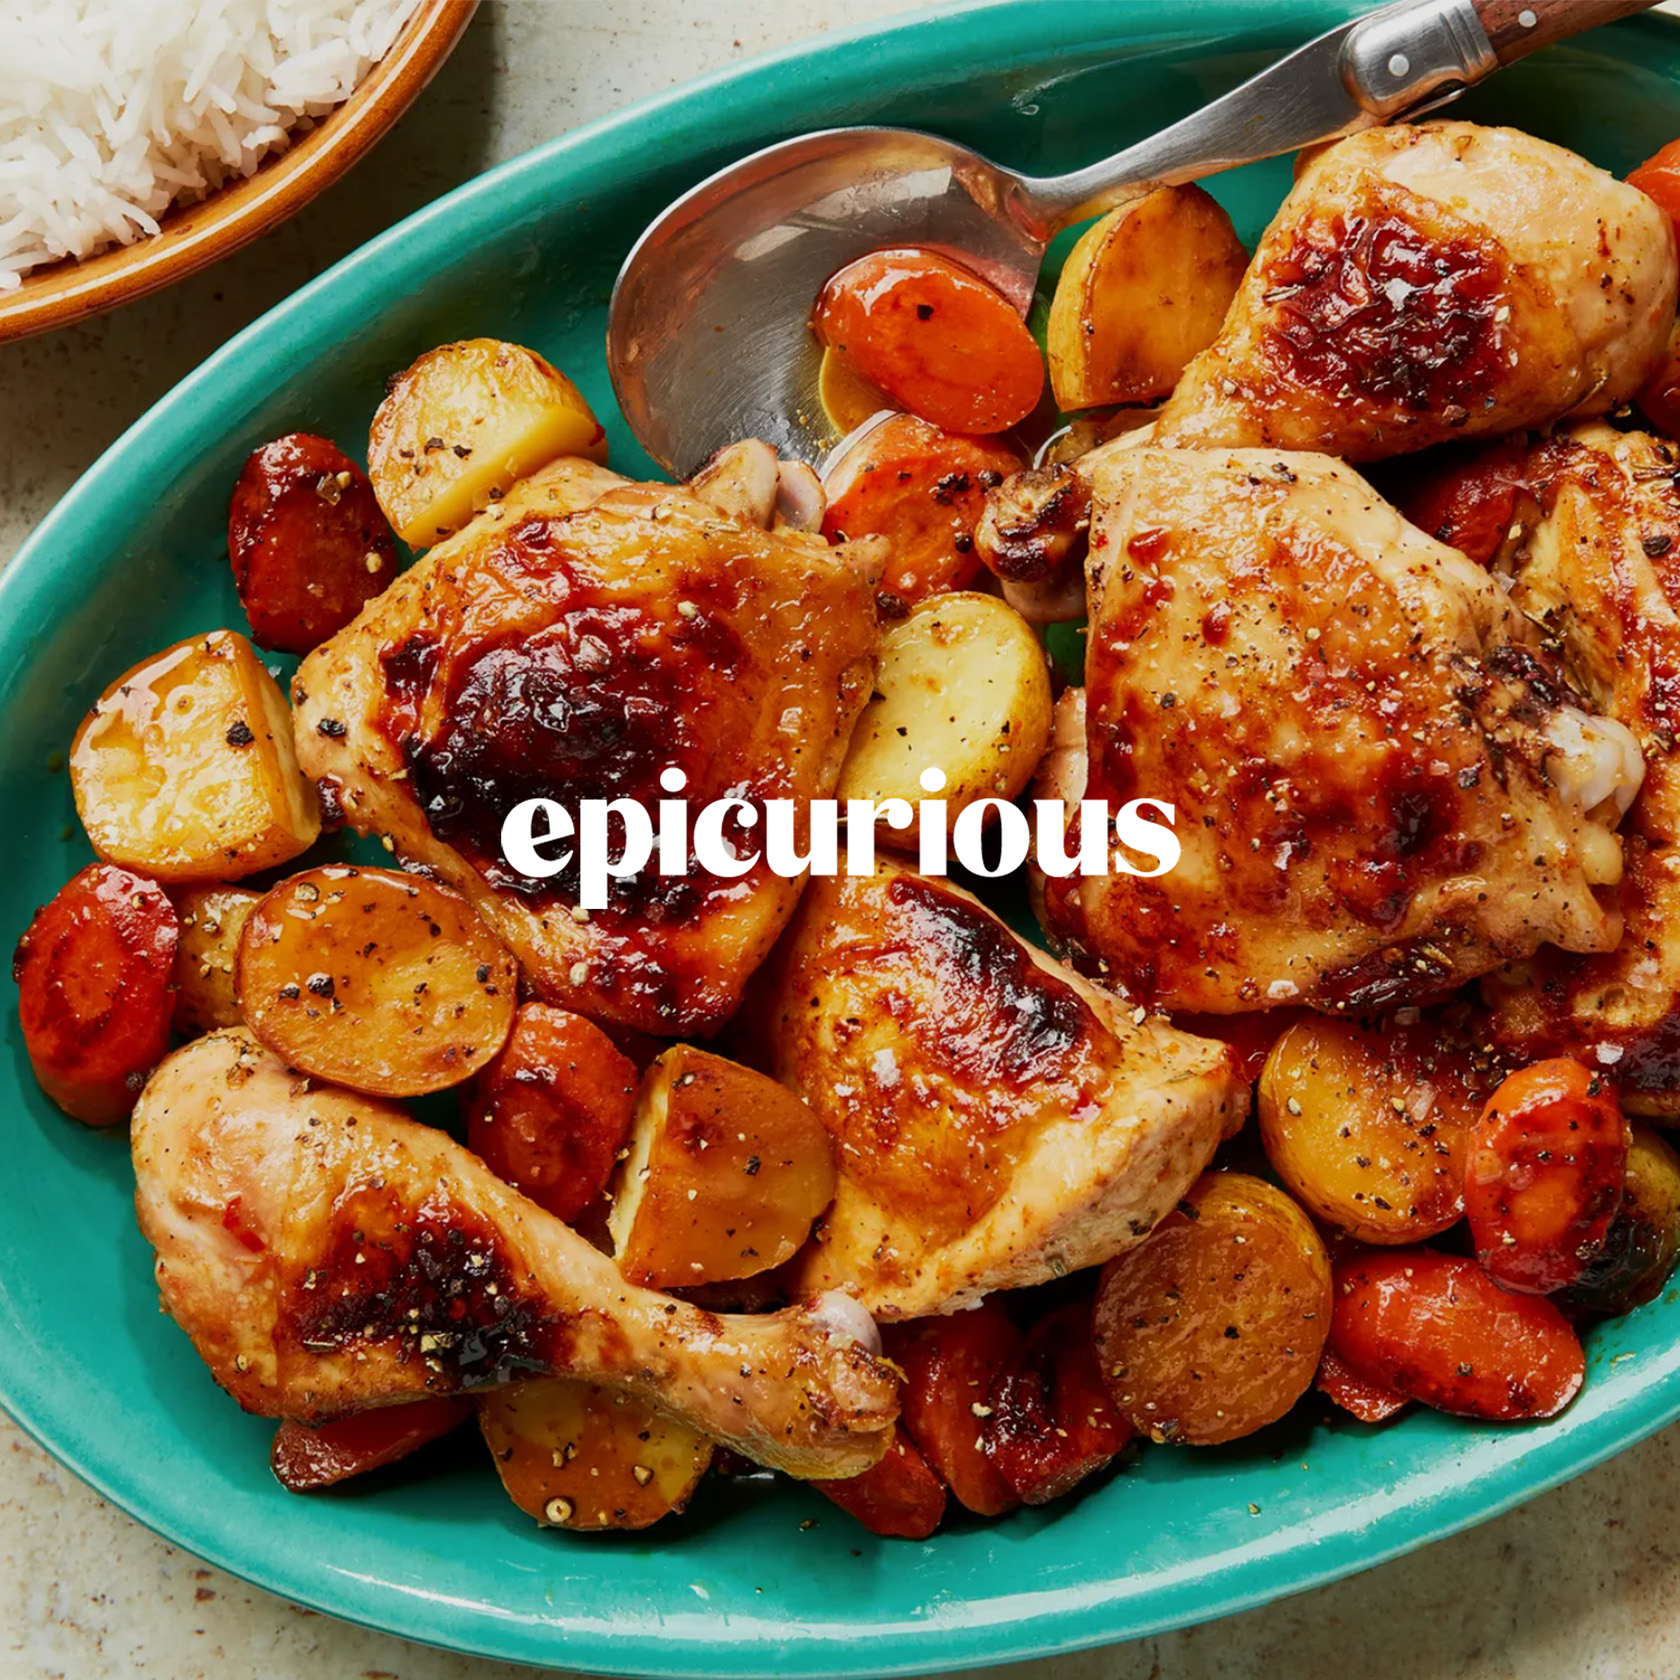 Epicurious "This New Pati Jinich Meal Plan Makes the Most of Leftovers"